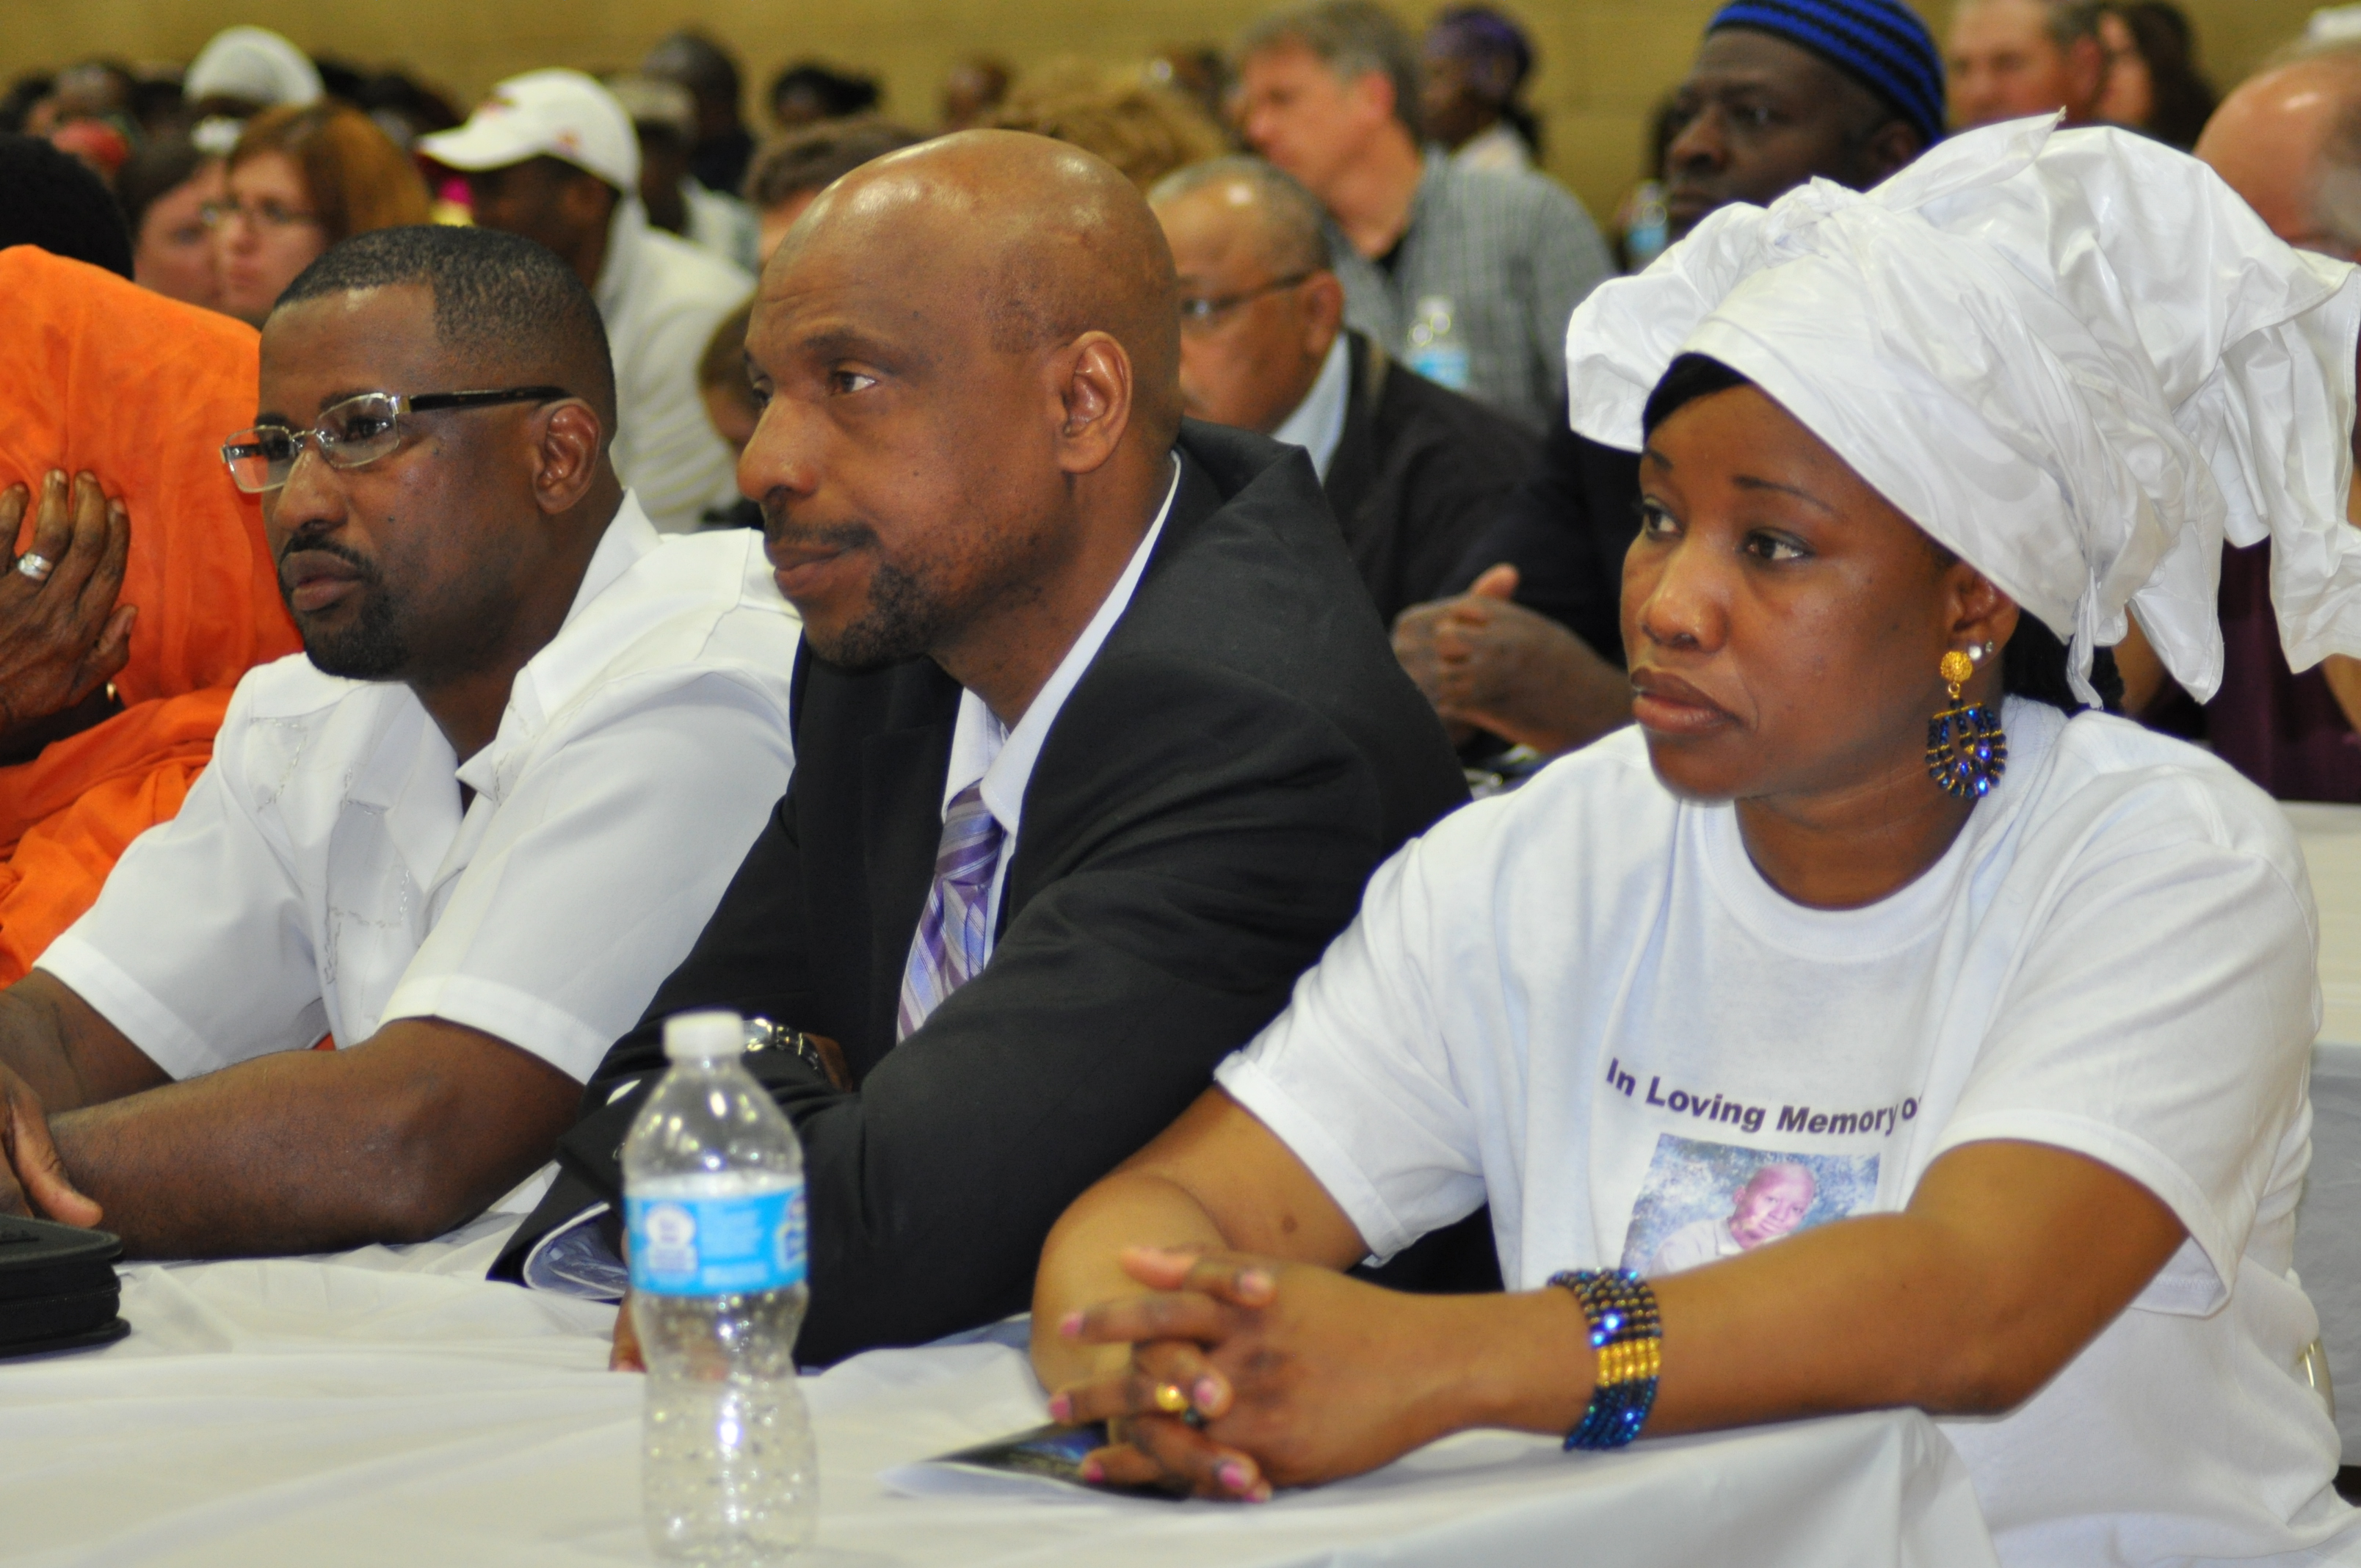 Three adults sitting at a table attentively watching an event, with a woman in a white headwrap on the right.